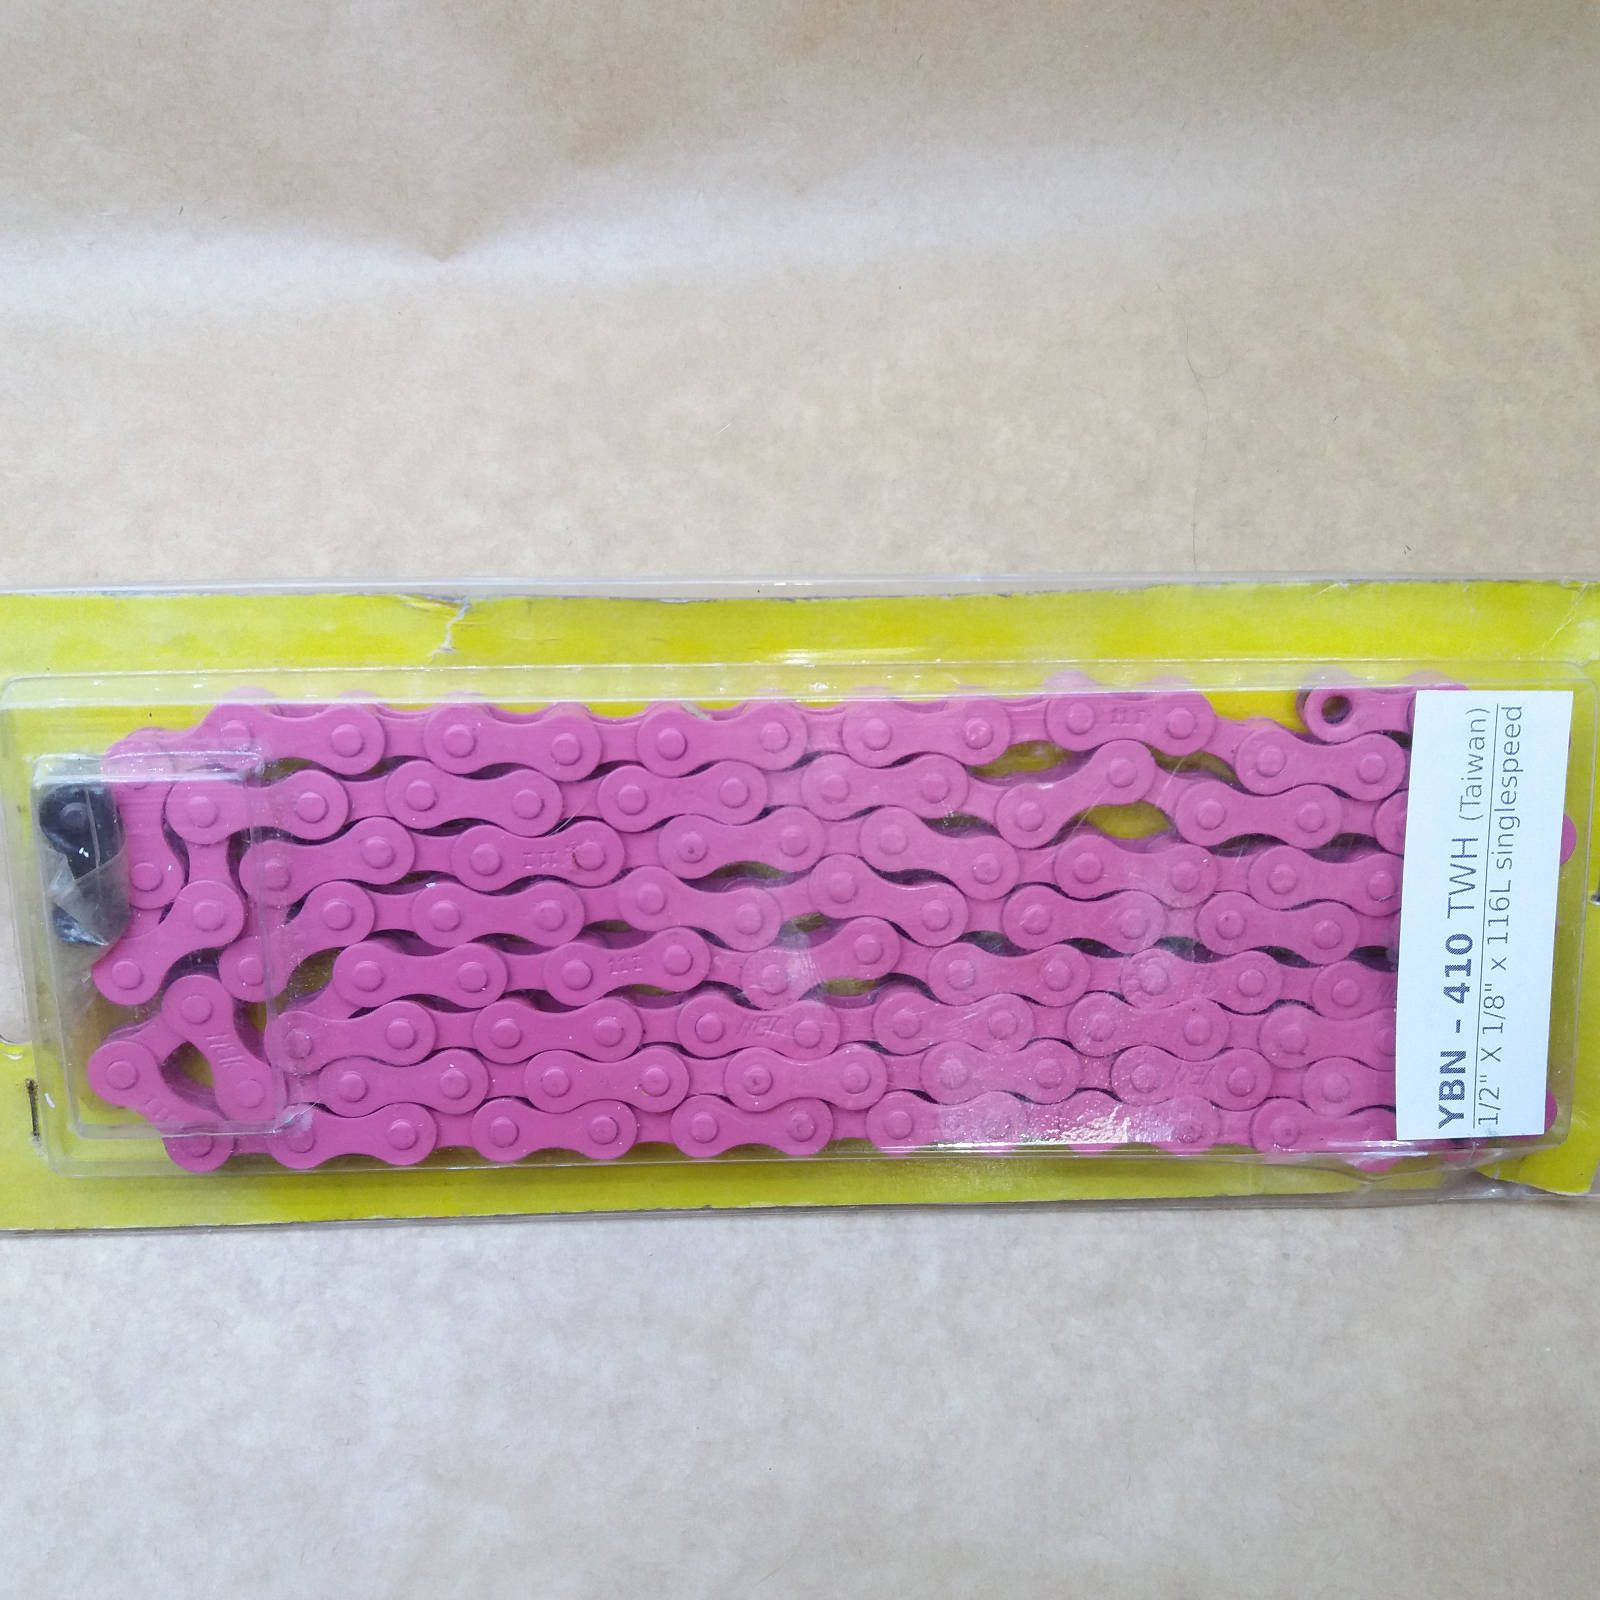 Colored Bicycle Chain Singlespeed Teflon Covered Easy Link Fixed Pink